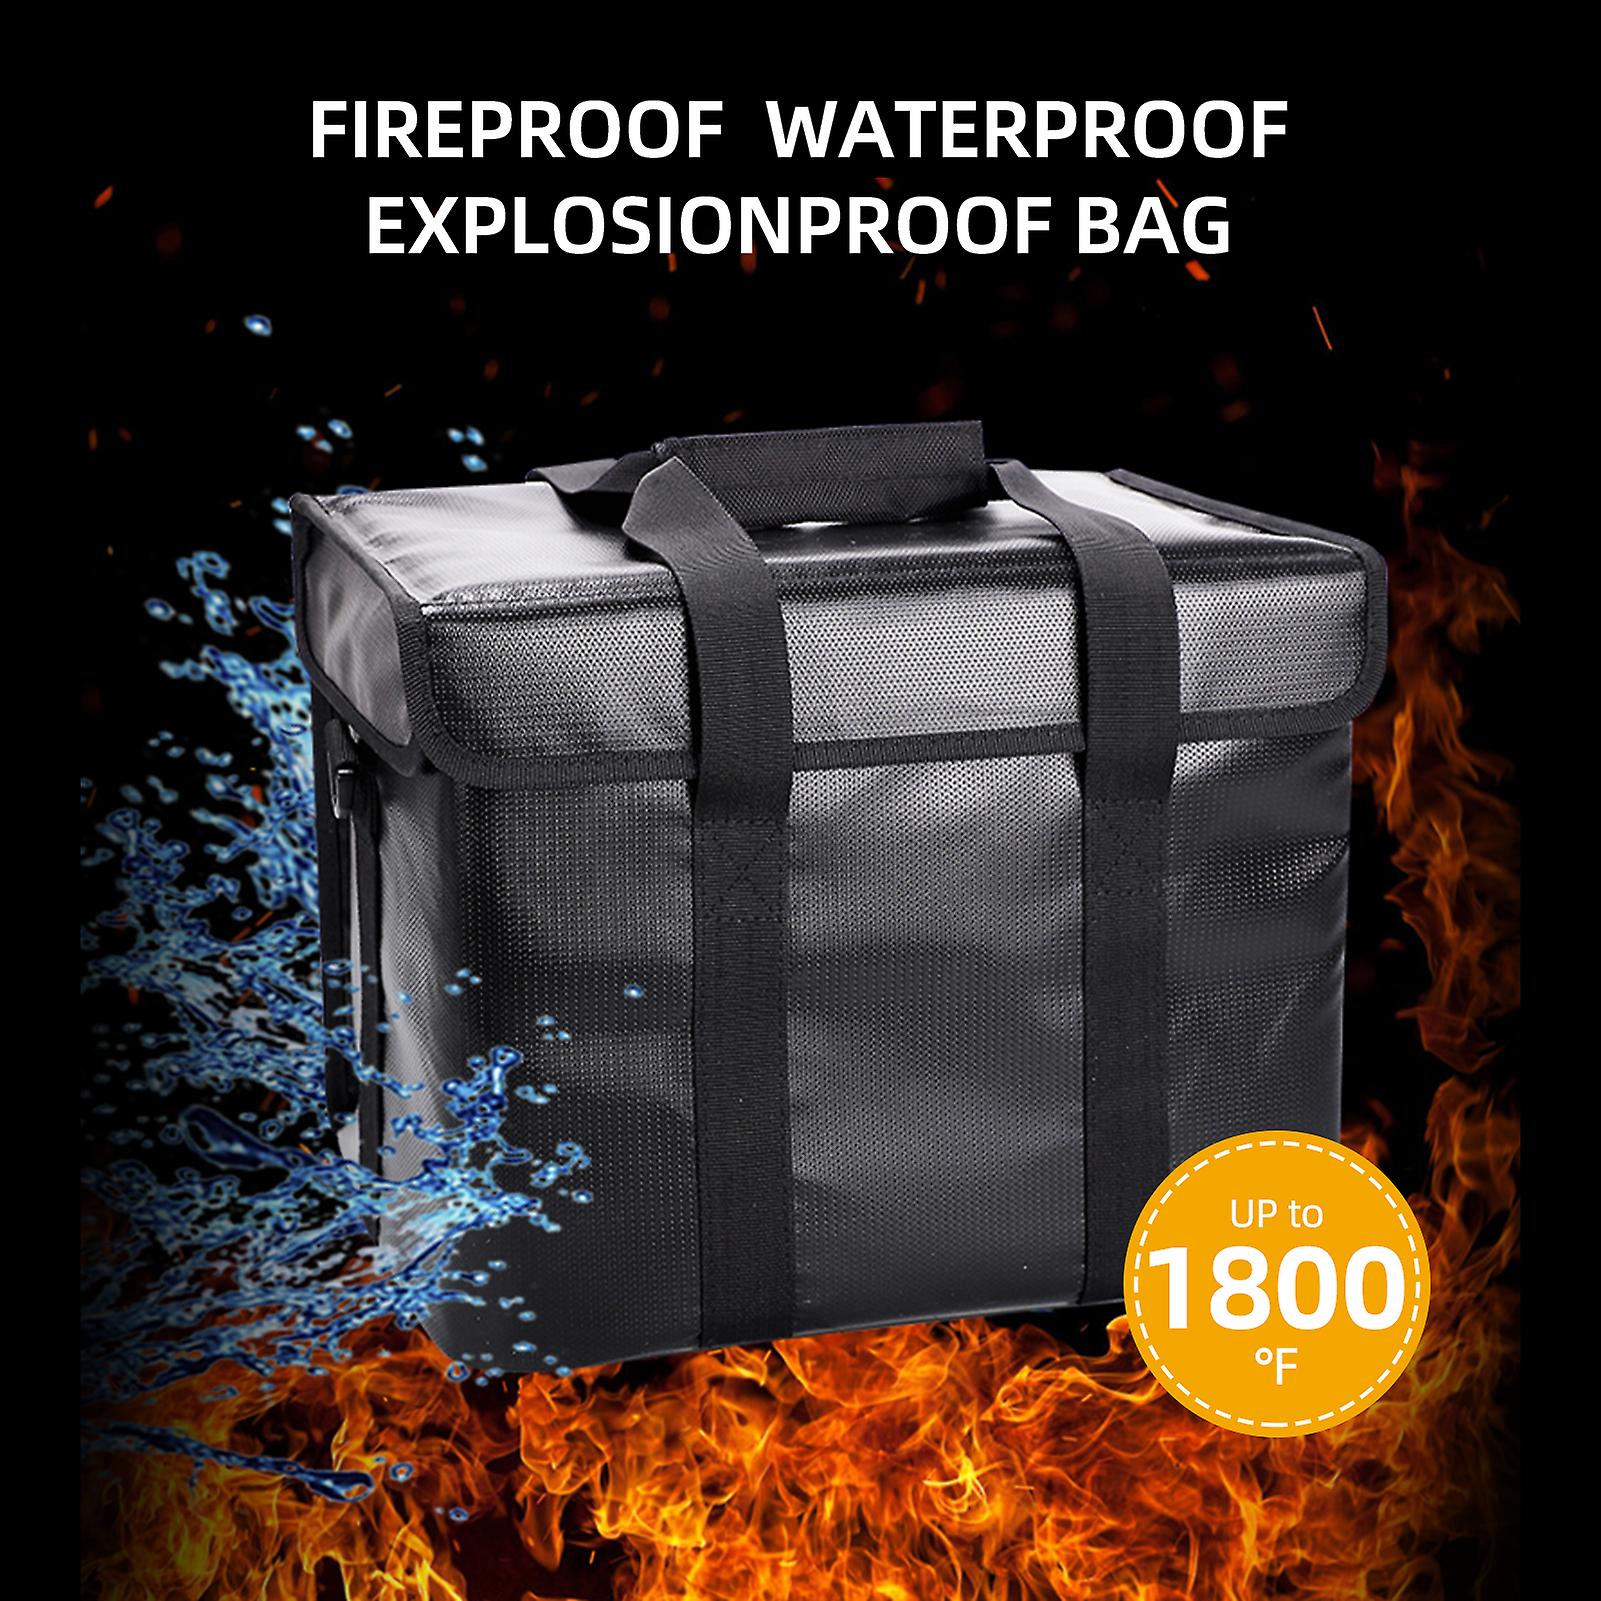 Fireproof Lipo Safe Bag Explosionproof Protective Battery Waterproof Bag With Zippers Handle Strap Portable Storage Guard Pouch For Battery Storage An